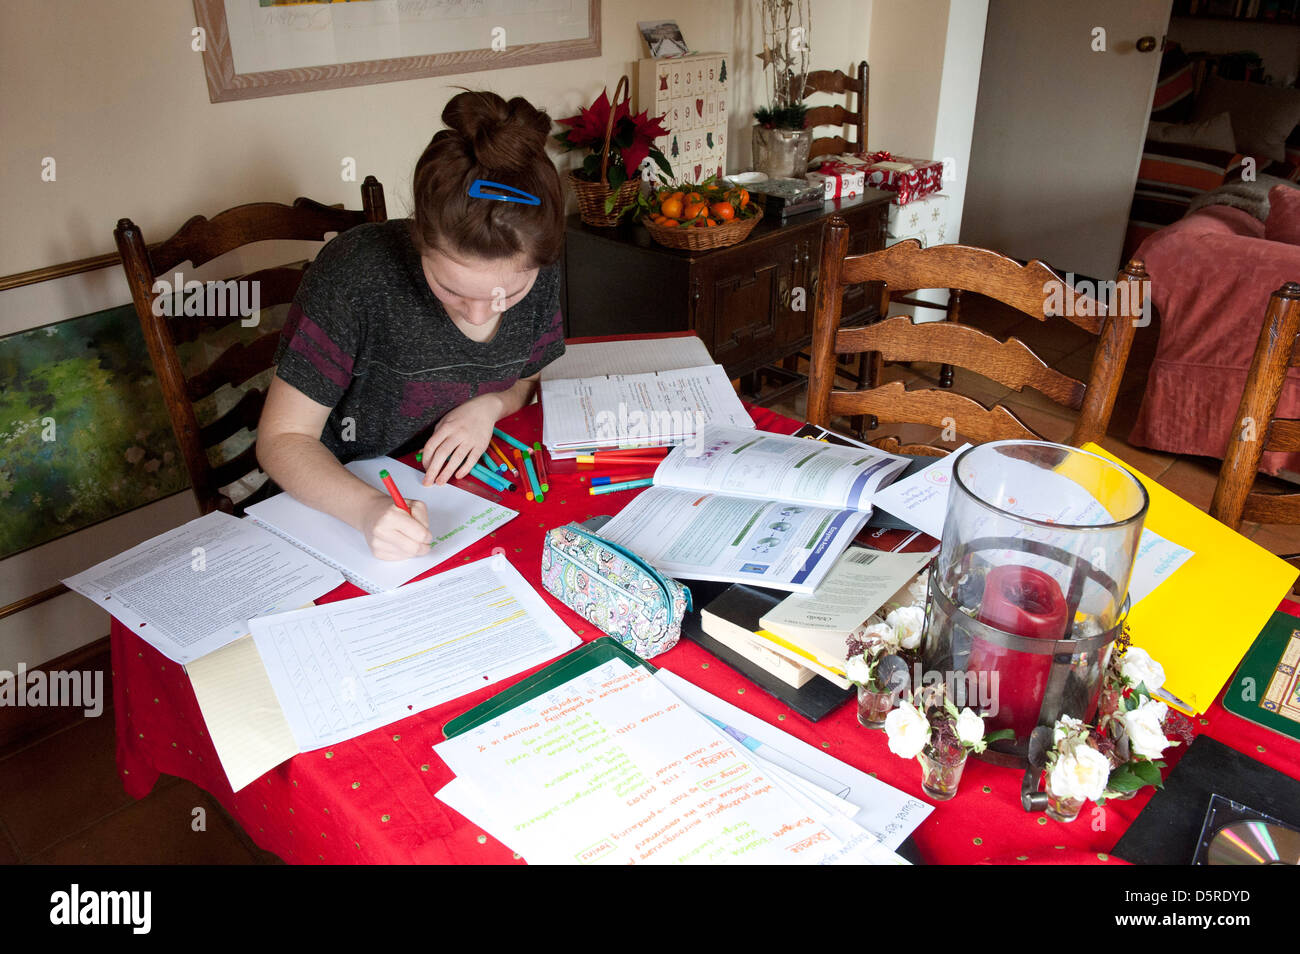 Getting down to A level revision at home in easter holidays, can be hard. Stock Photo